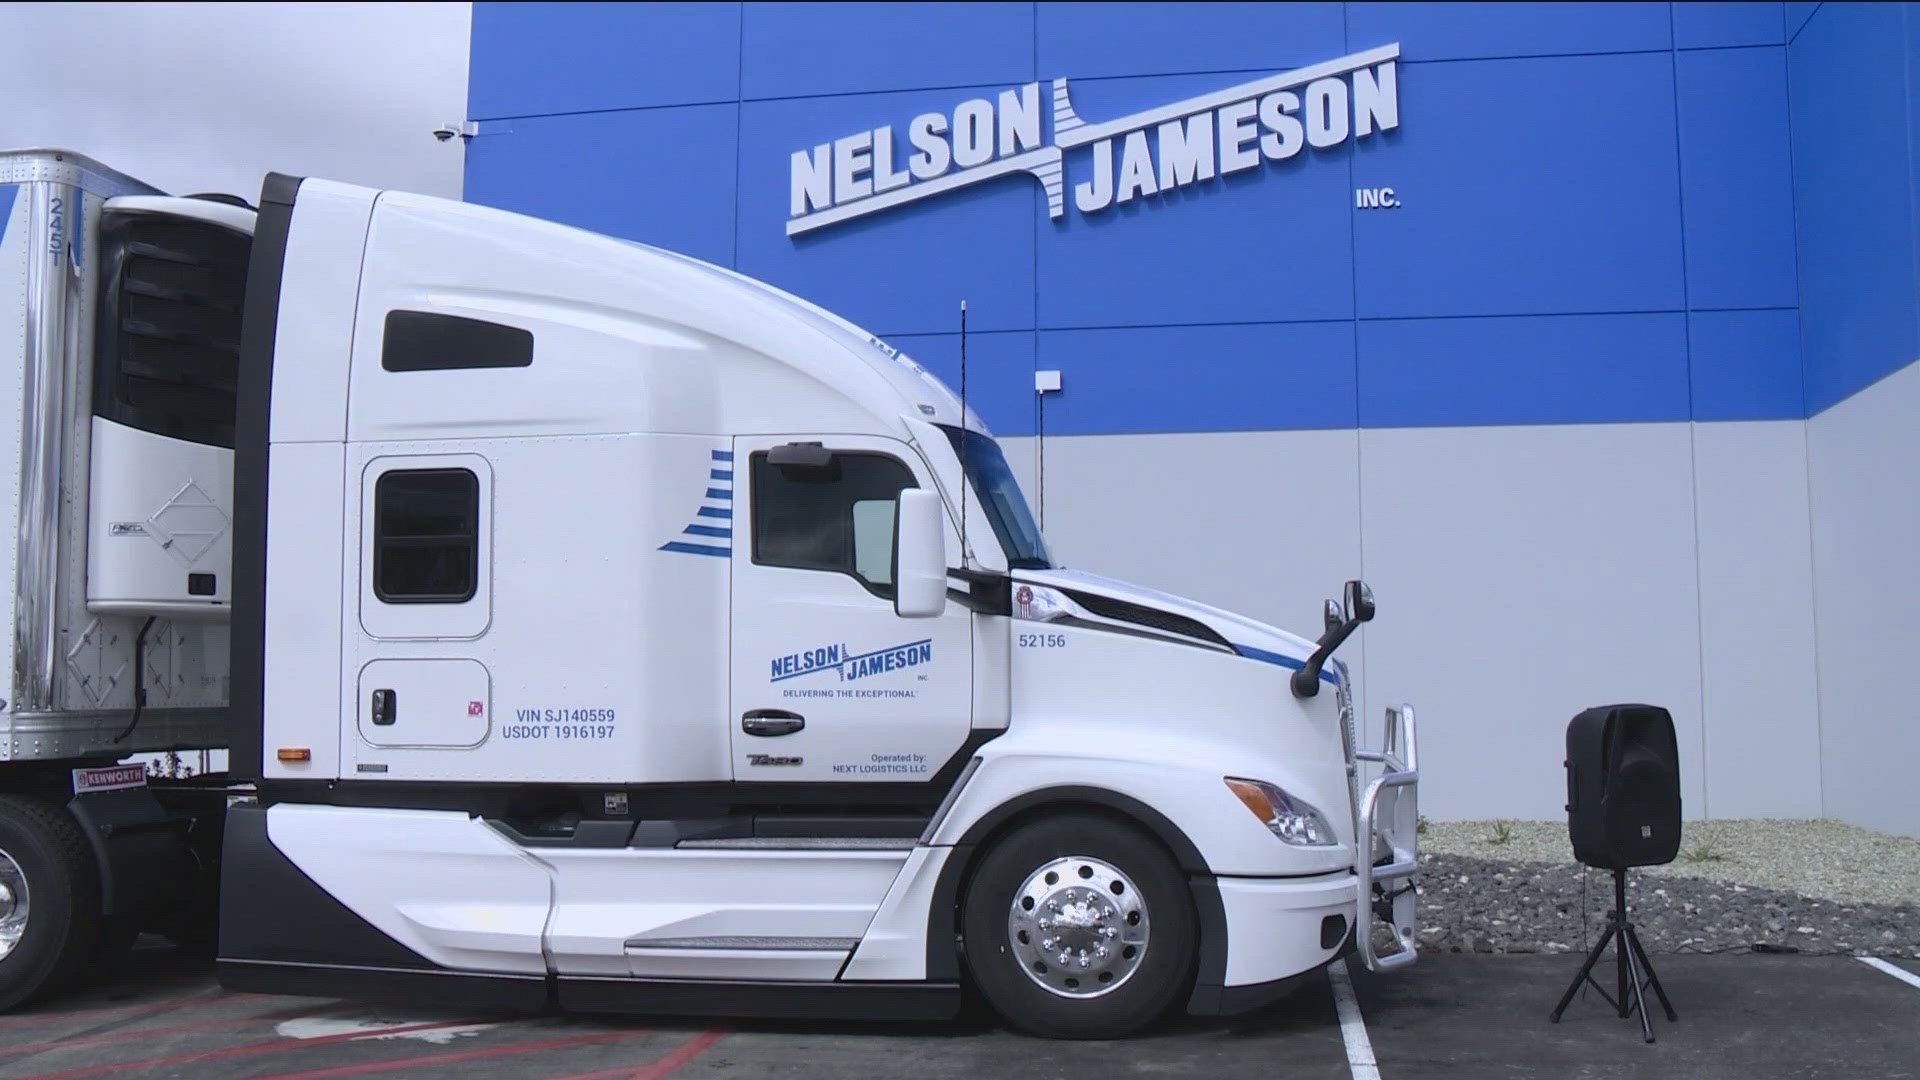 The new distribution center owned by Nelson-Jameson, will add up to 20 new jobs in the Jerome area.